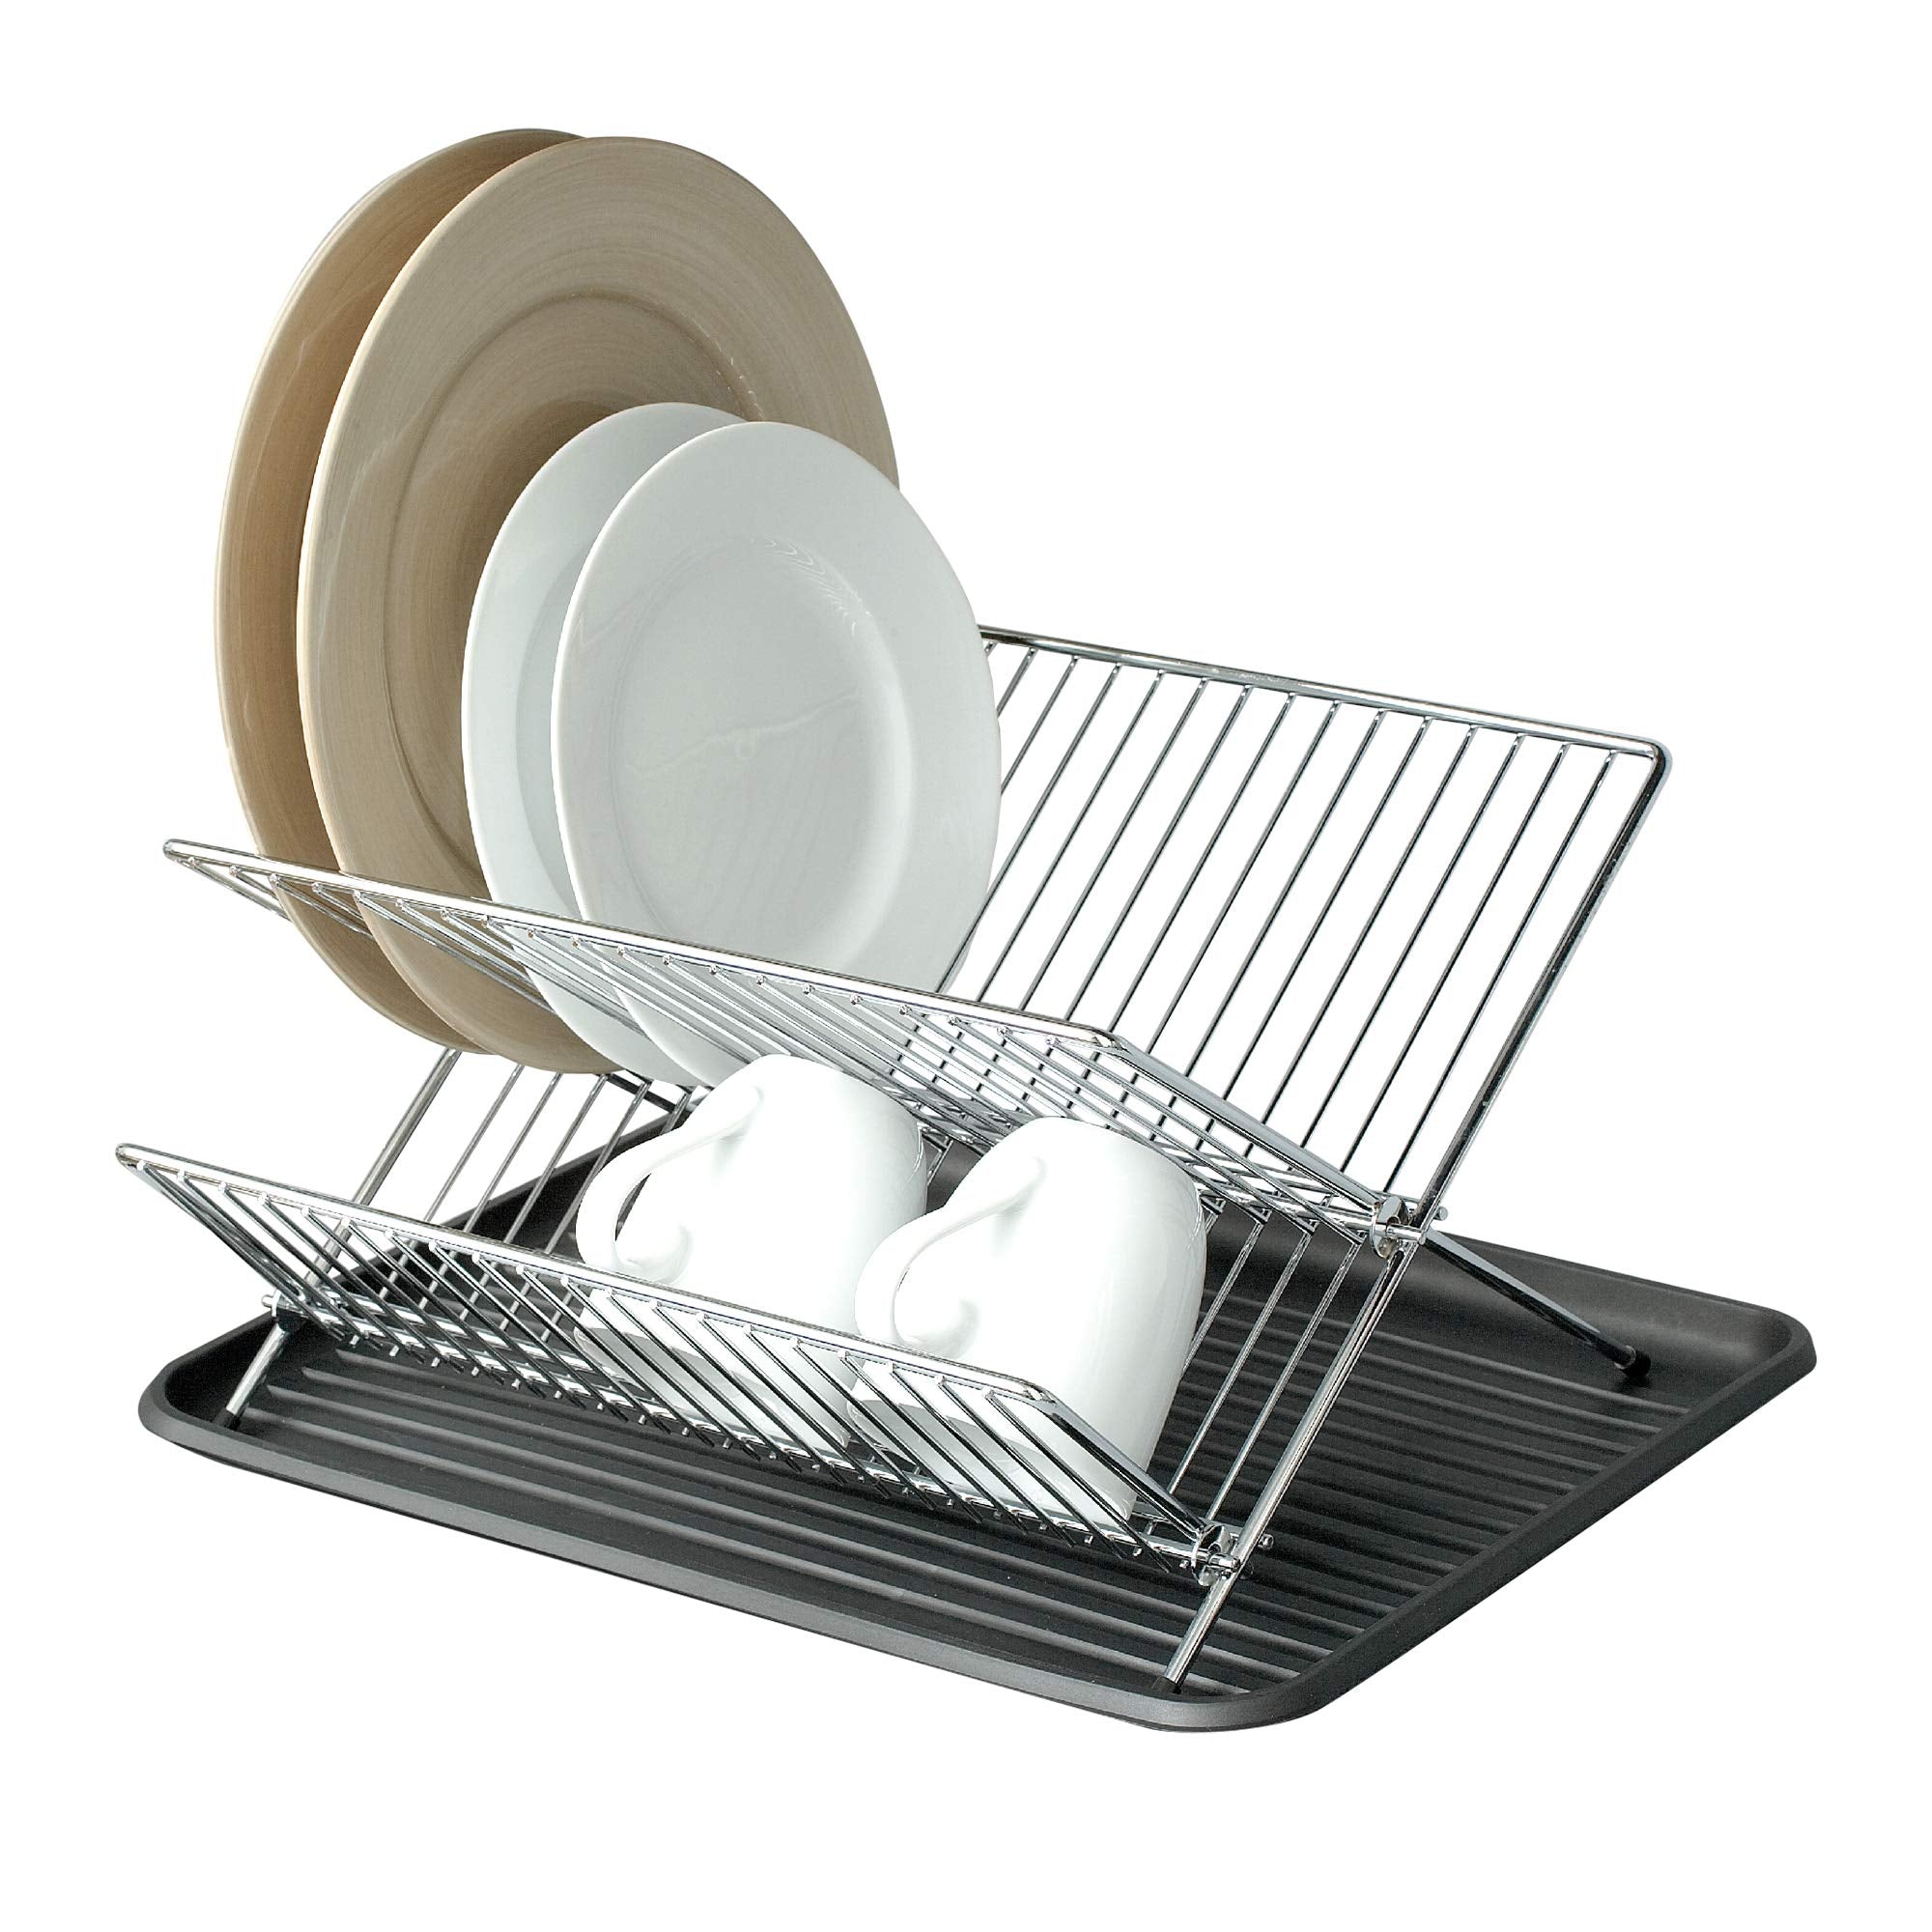 Bamboo 2-Tier Foldable Dish Drying Rack Over Sink